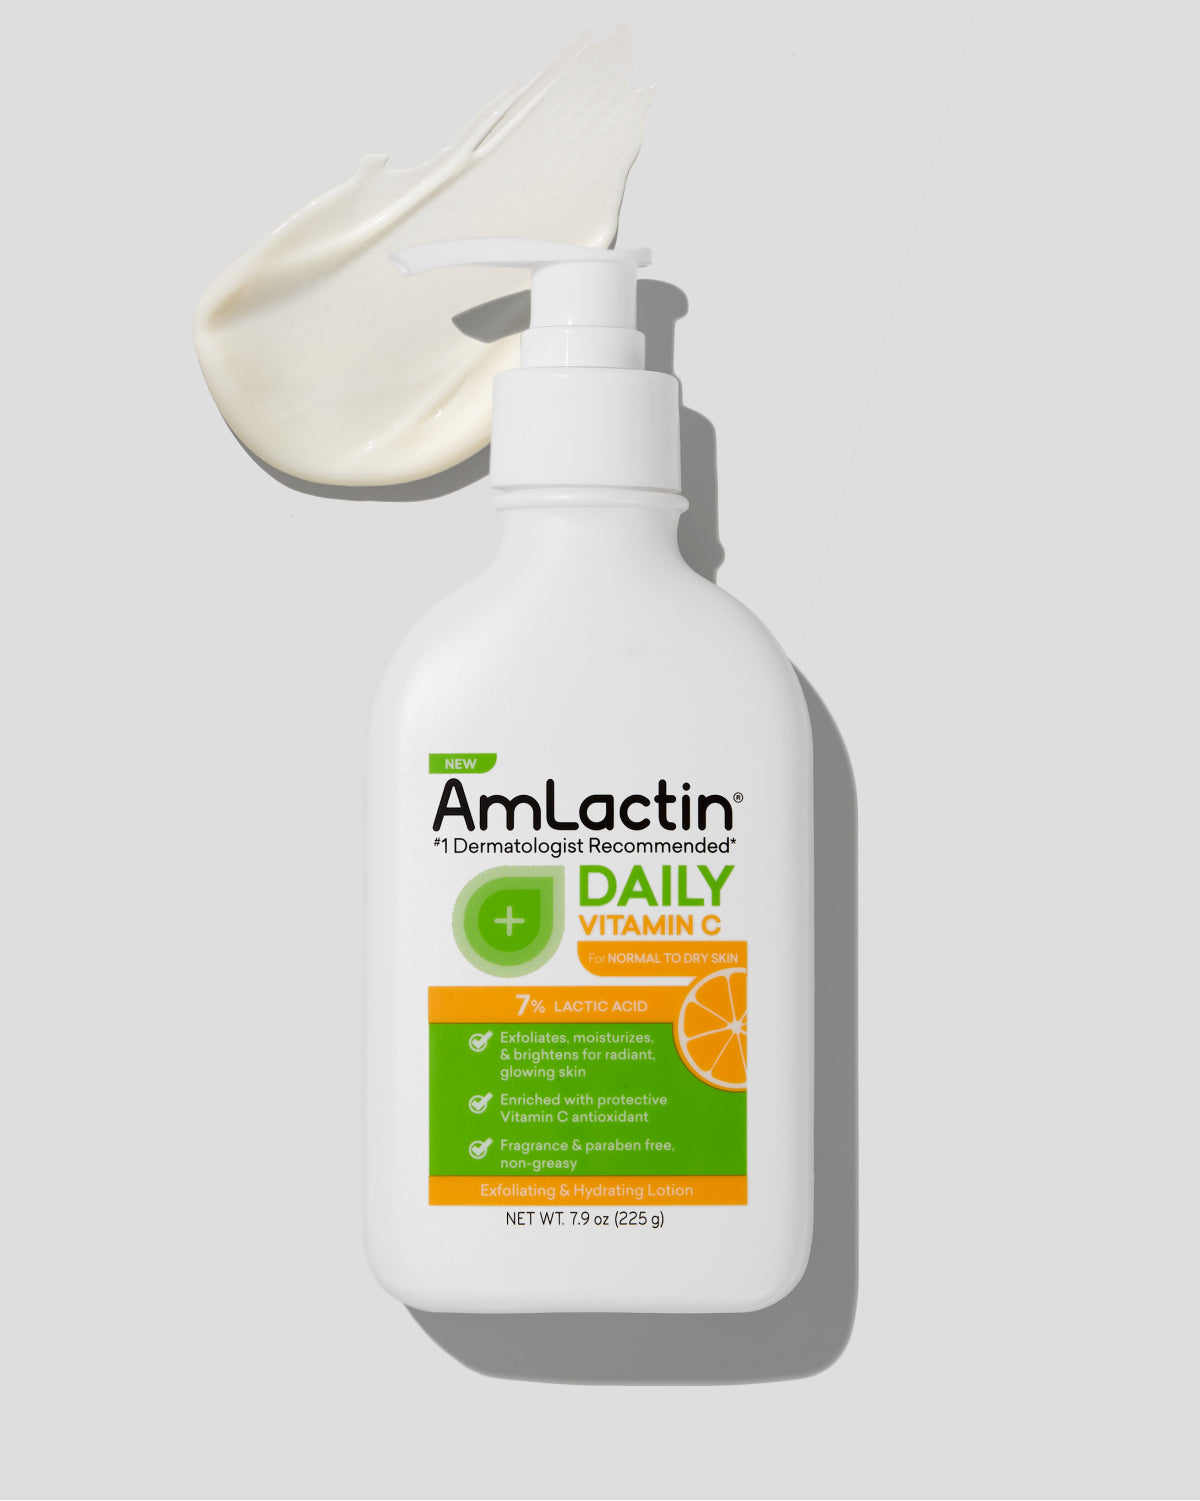 AmLactin Ultra Smoothing - 4.9 oz Body & Hand Cream with 15% Lactic Acid -  Exfoliator and Moisturizer for Rough and Bumpy Dry Skin (Packaging May